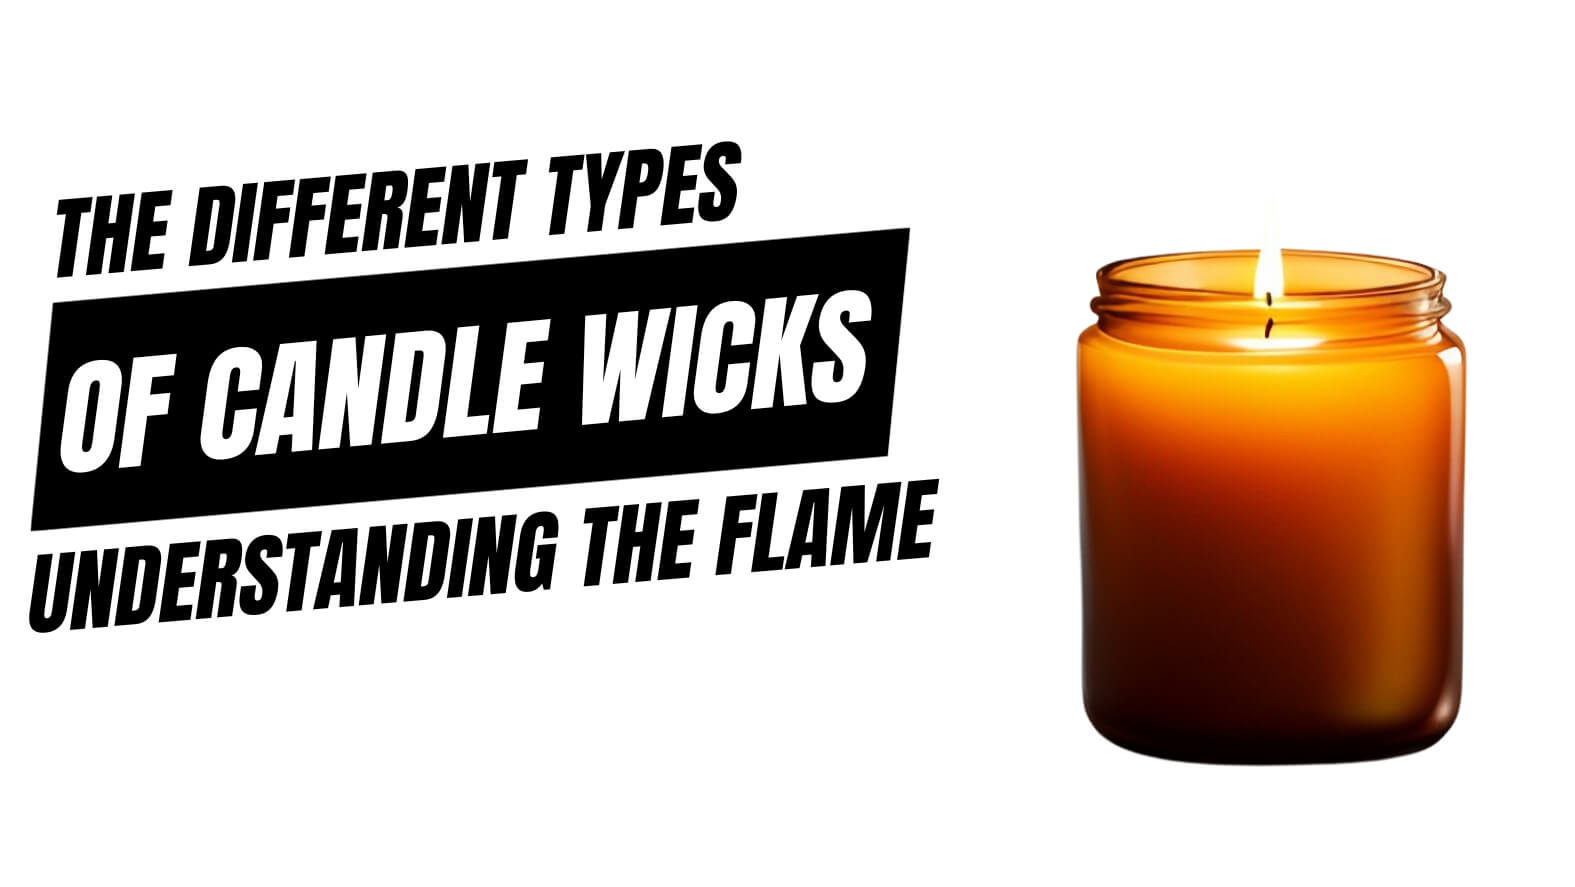 What are the different types of candle wicks?